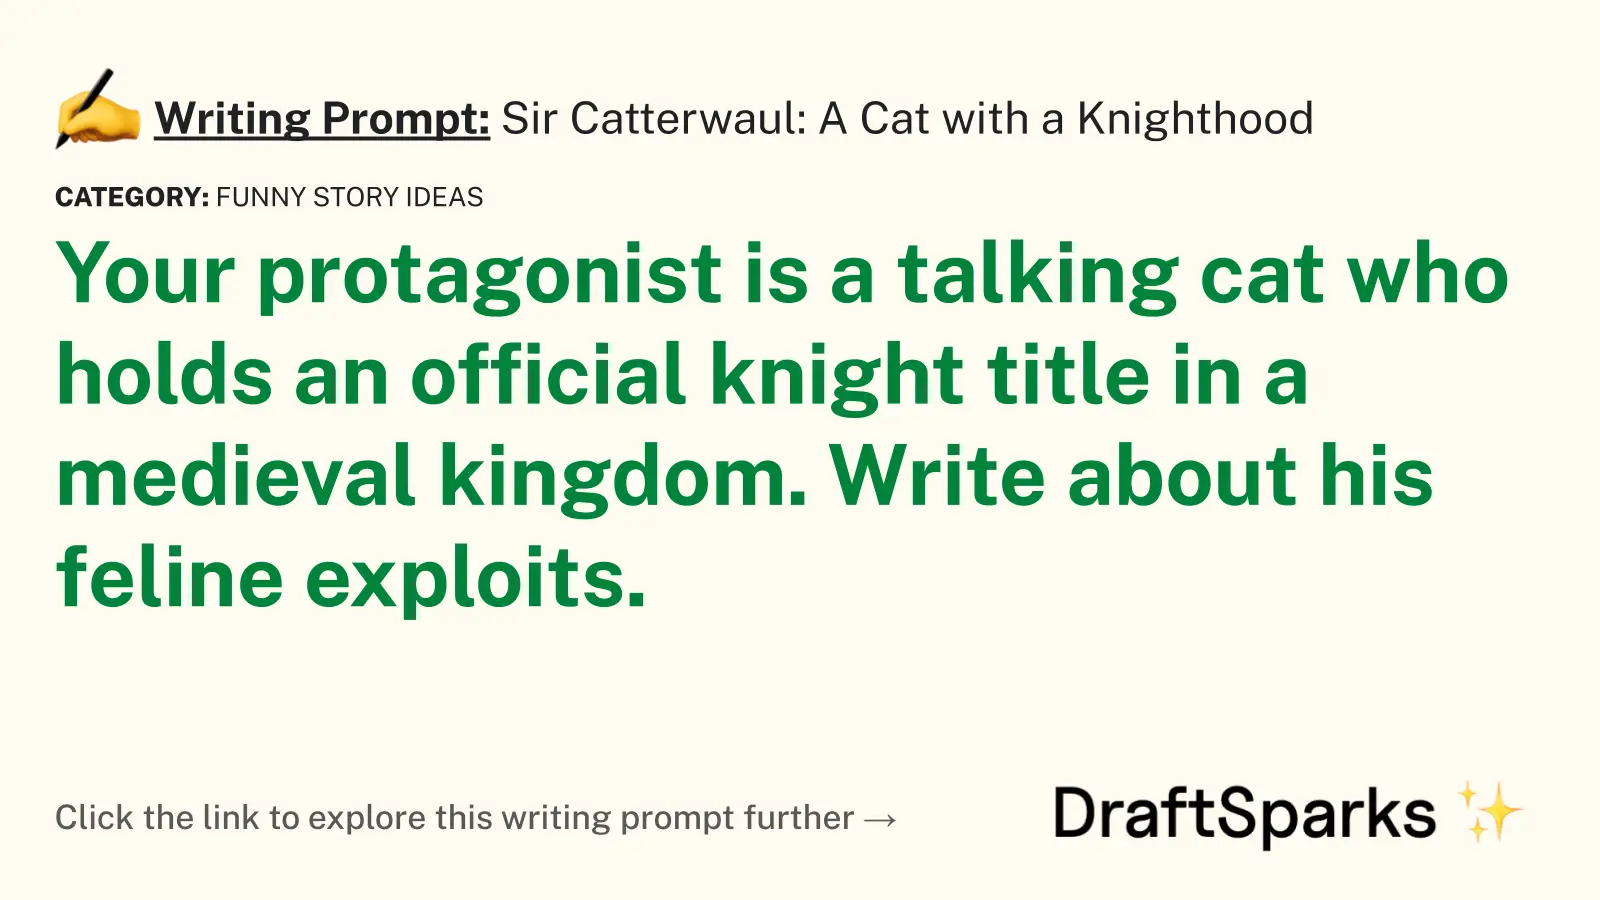 Sir Catterwaul: A Cat with a Knighthood